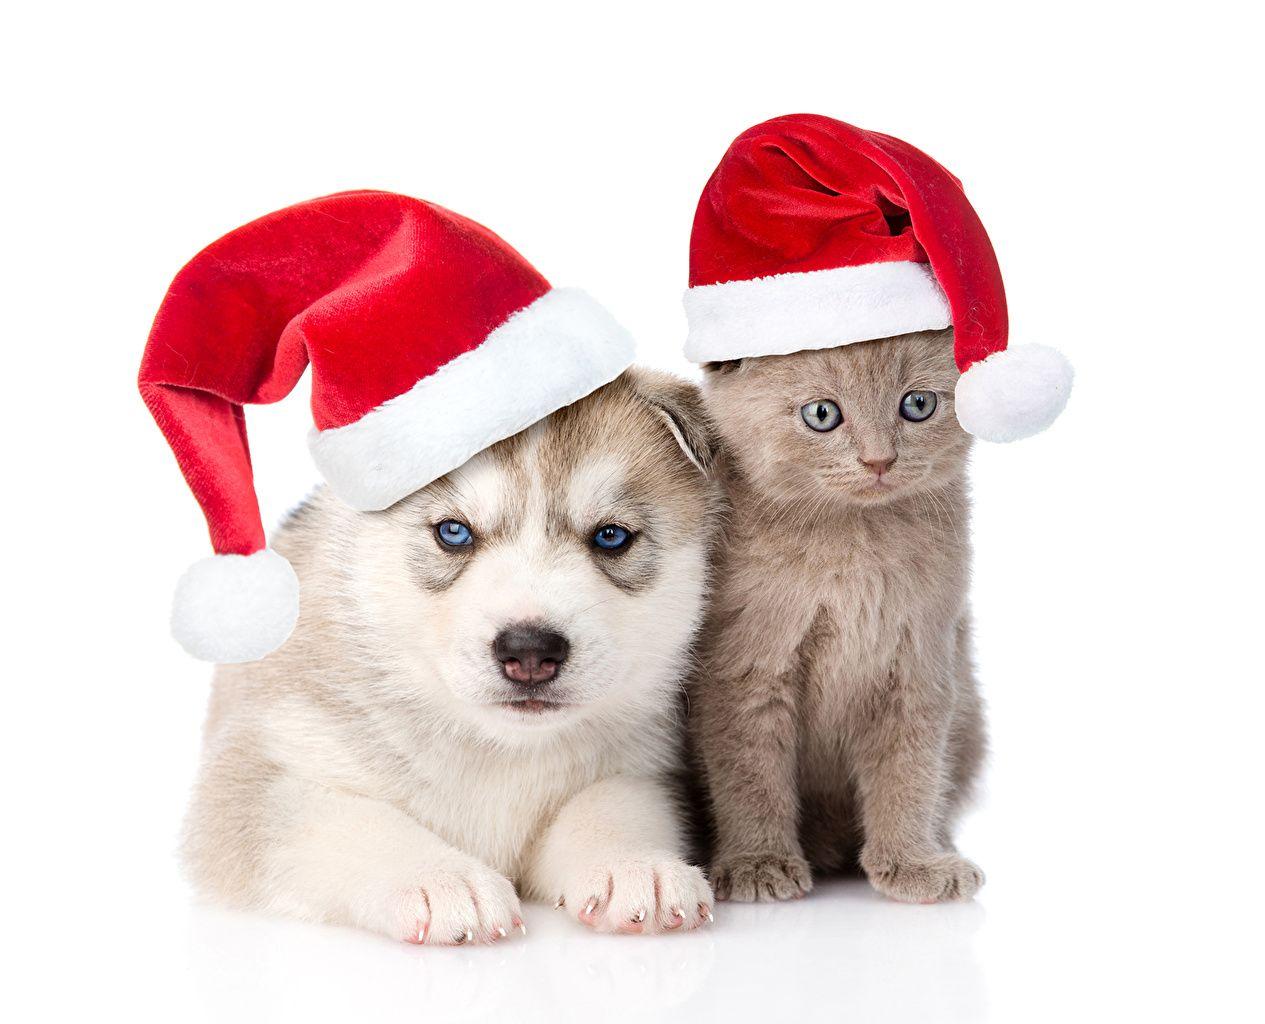 Wallpaper Husky kitty cat Cats Dogs New year Two Winter hat Animals